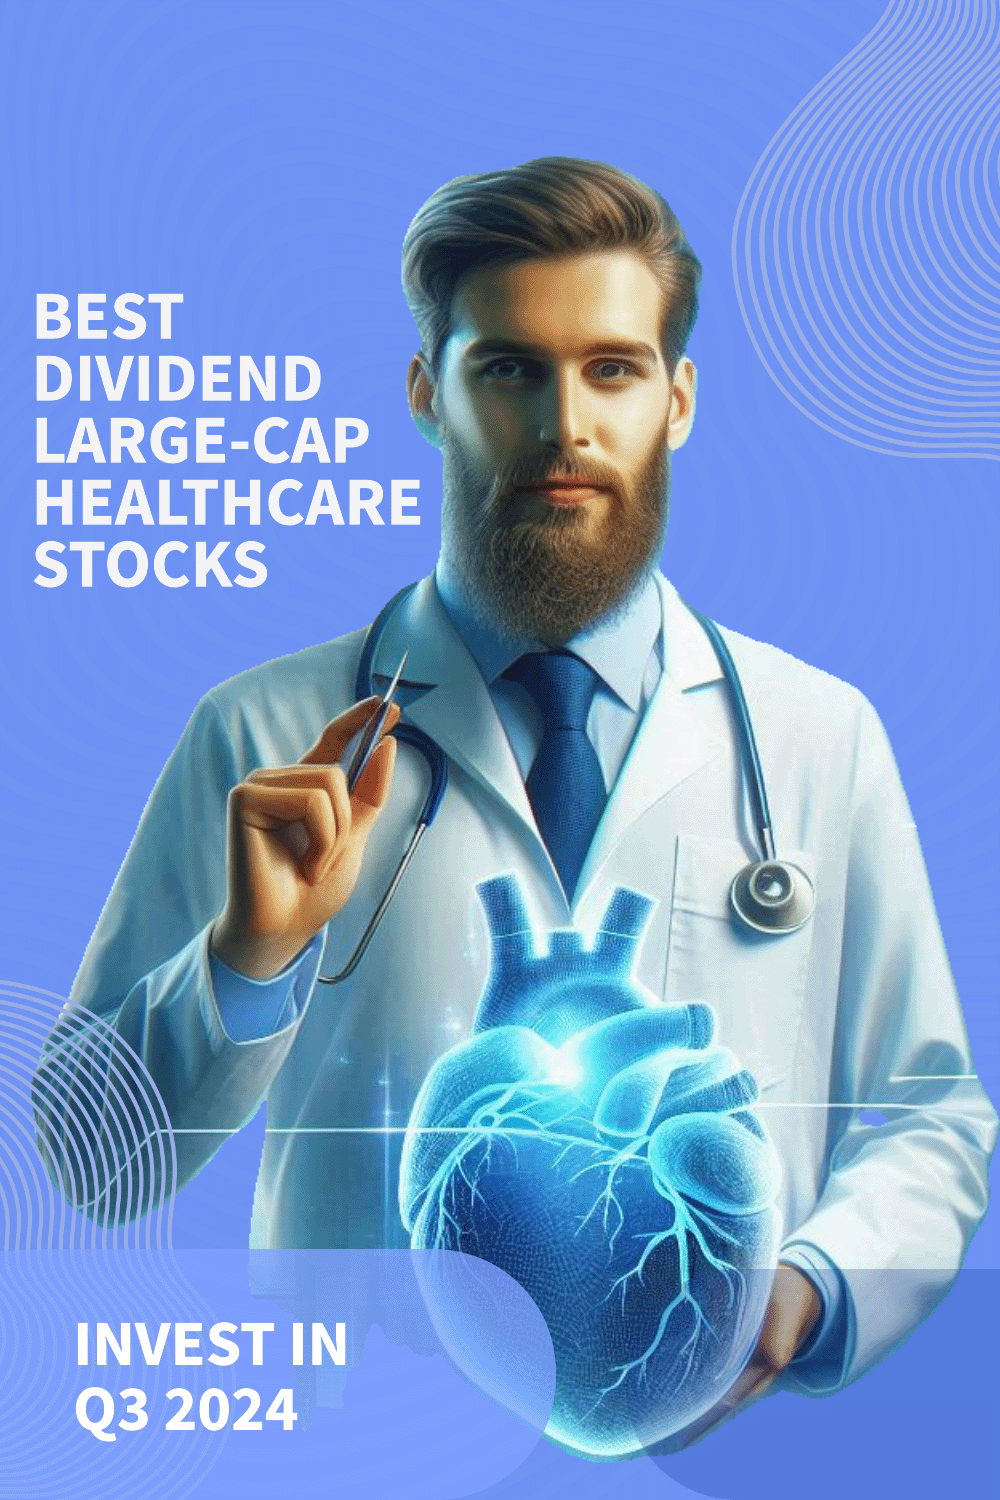 Best dividend large-cap healthcare stocks to invest in Q3 2024